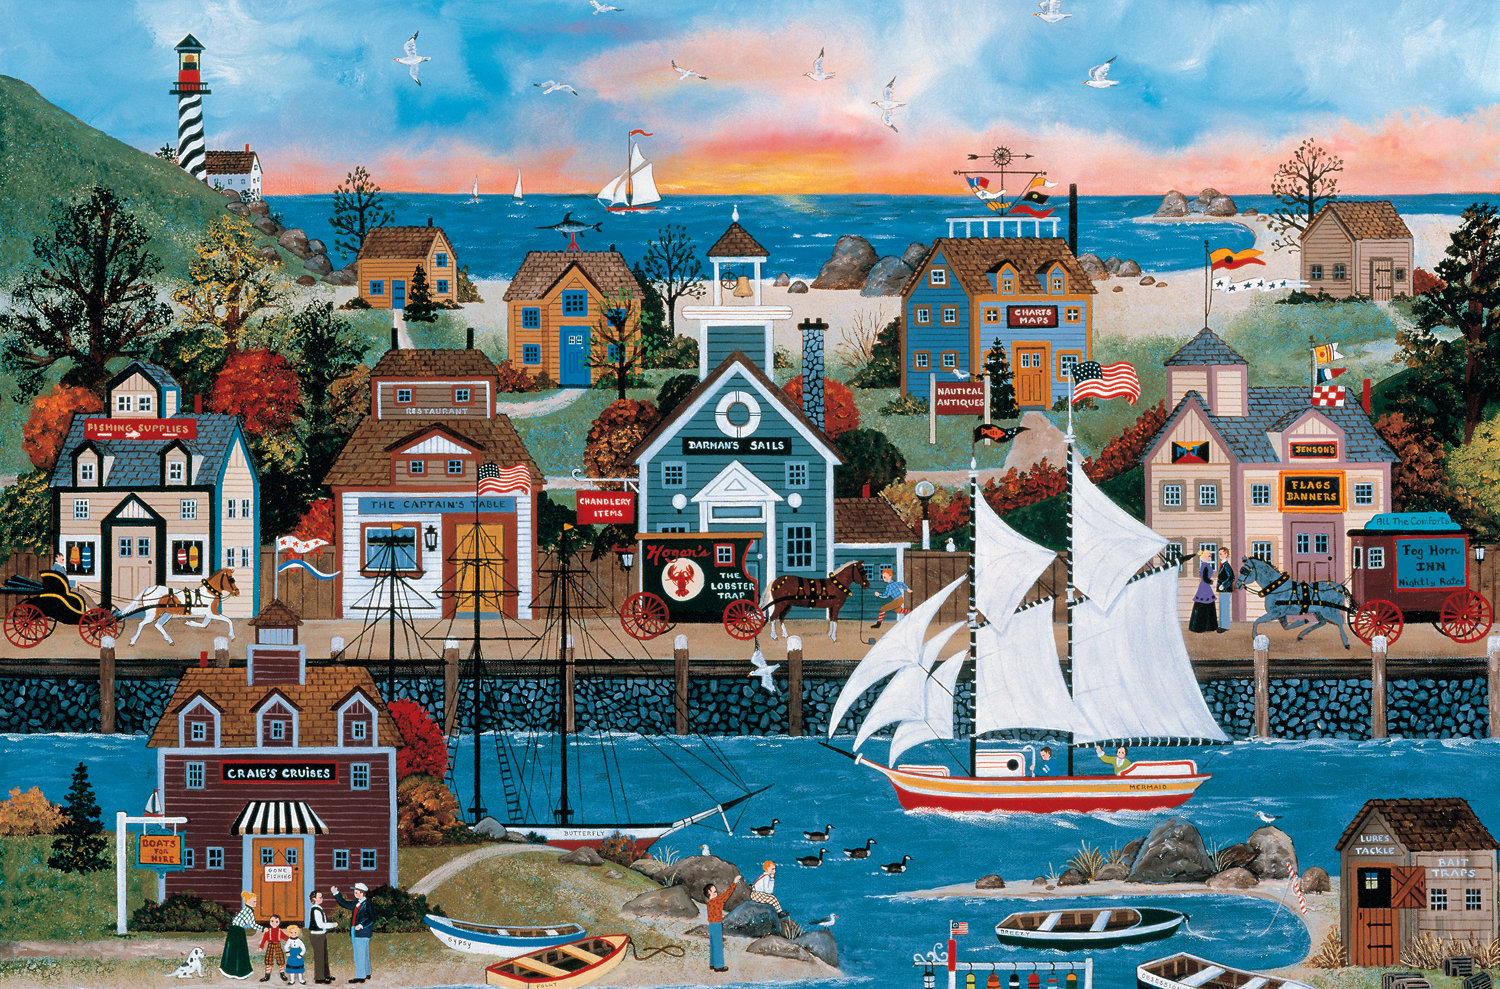 Catching The Breeze Boat Jigsaw Puzzle